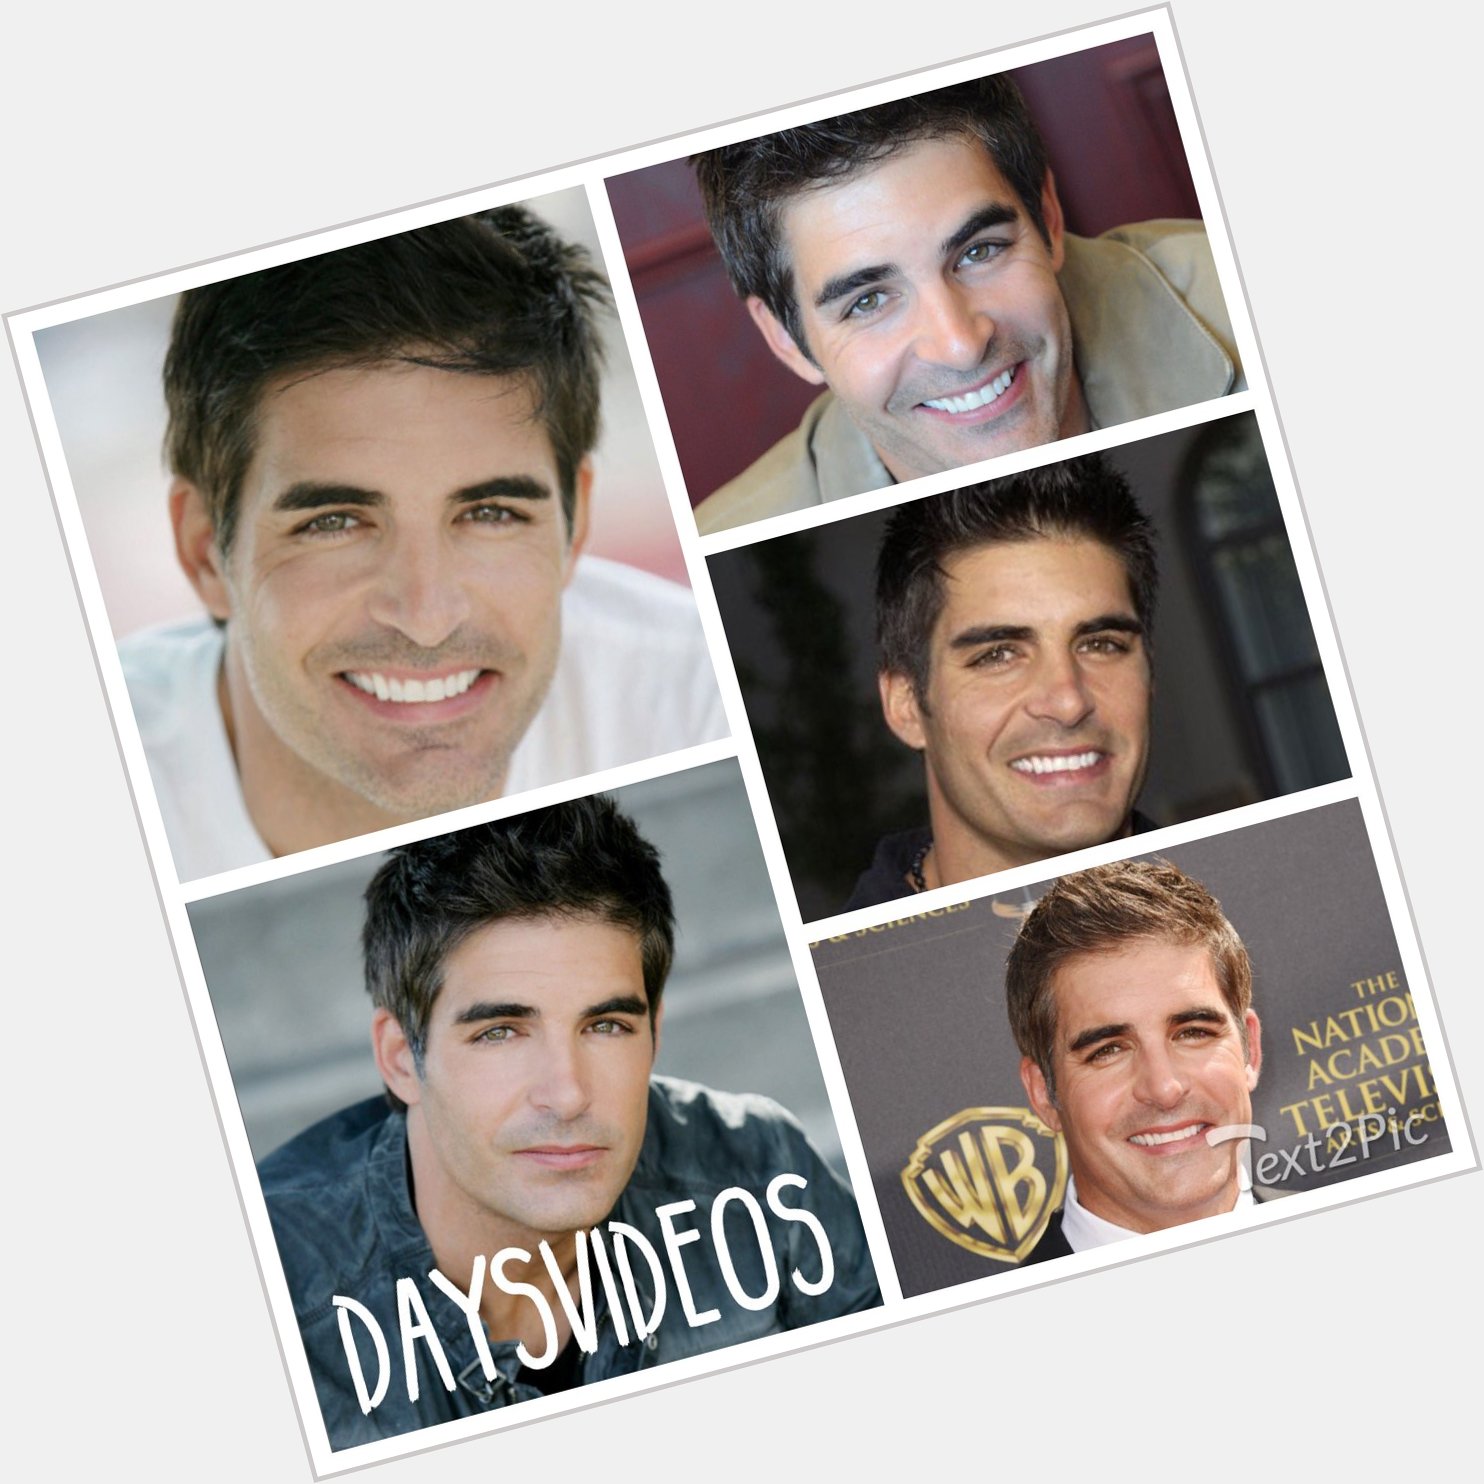 Happy Birthday to Galen Gering (Rafe) who turns 46 today!  